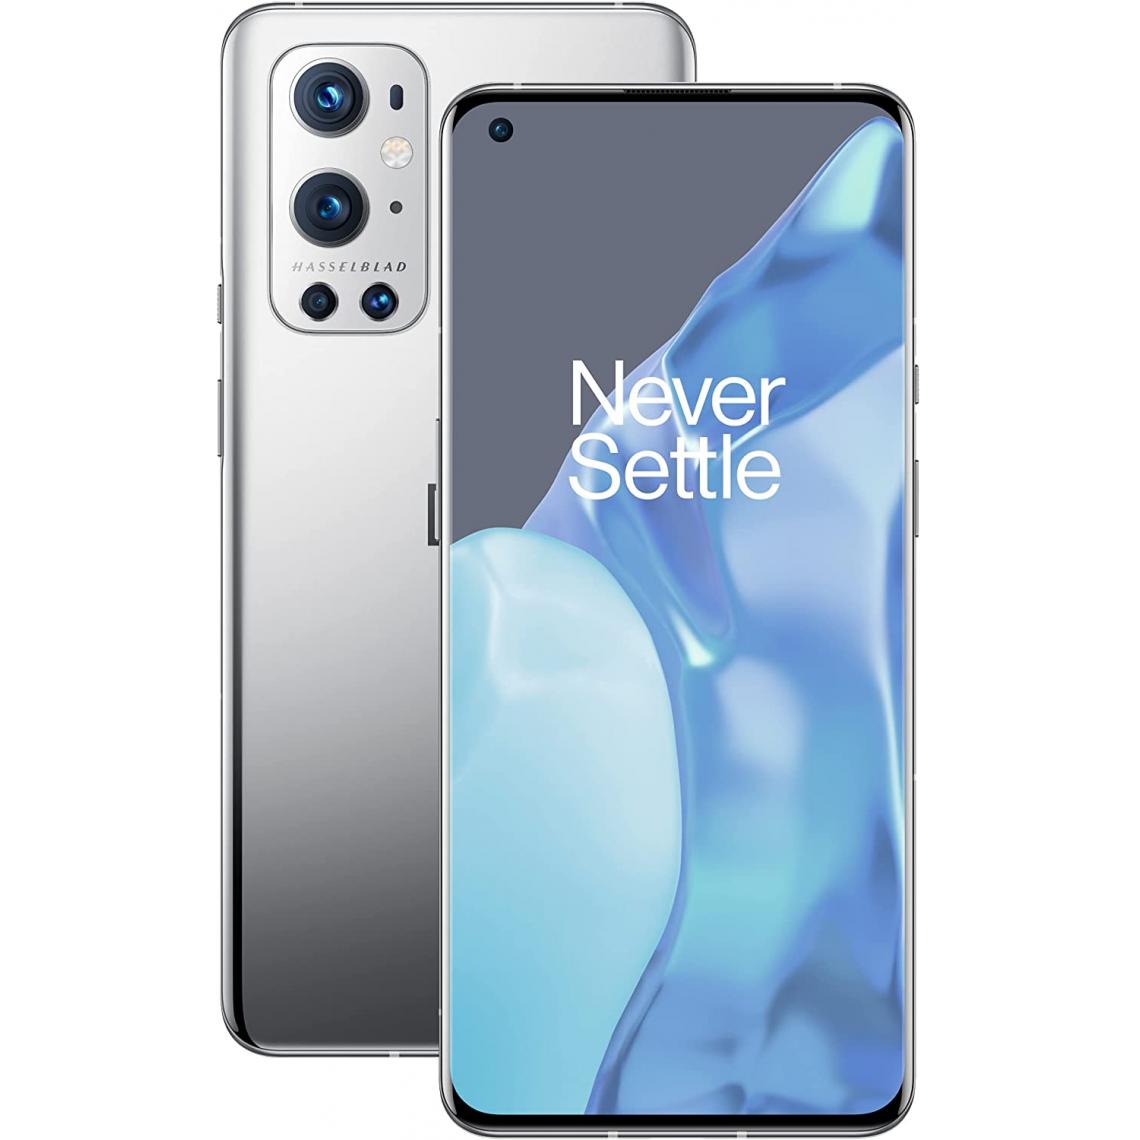 Oneplus - Oneplus 9 Pro 5G 12+256Go Argent - Smartphone Android